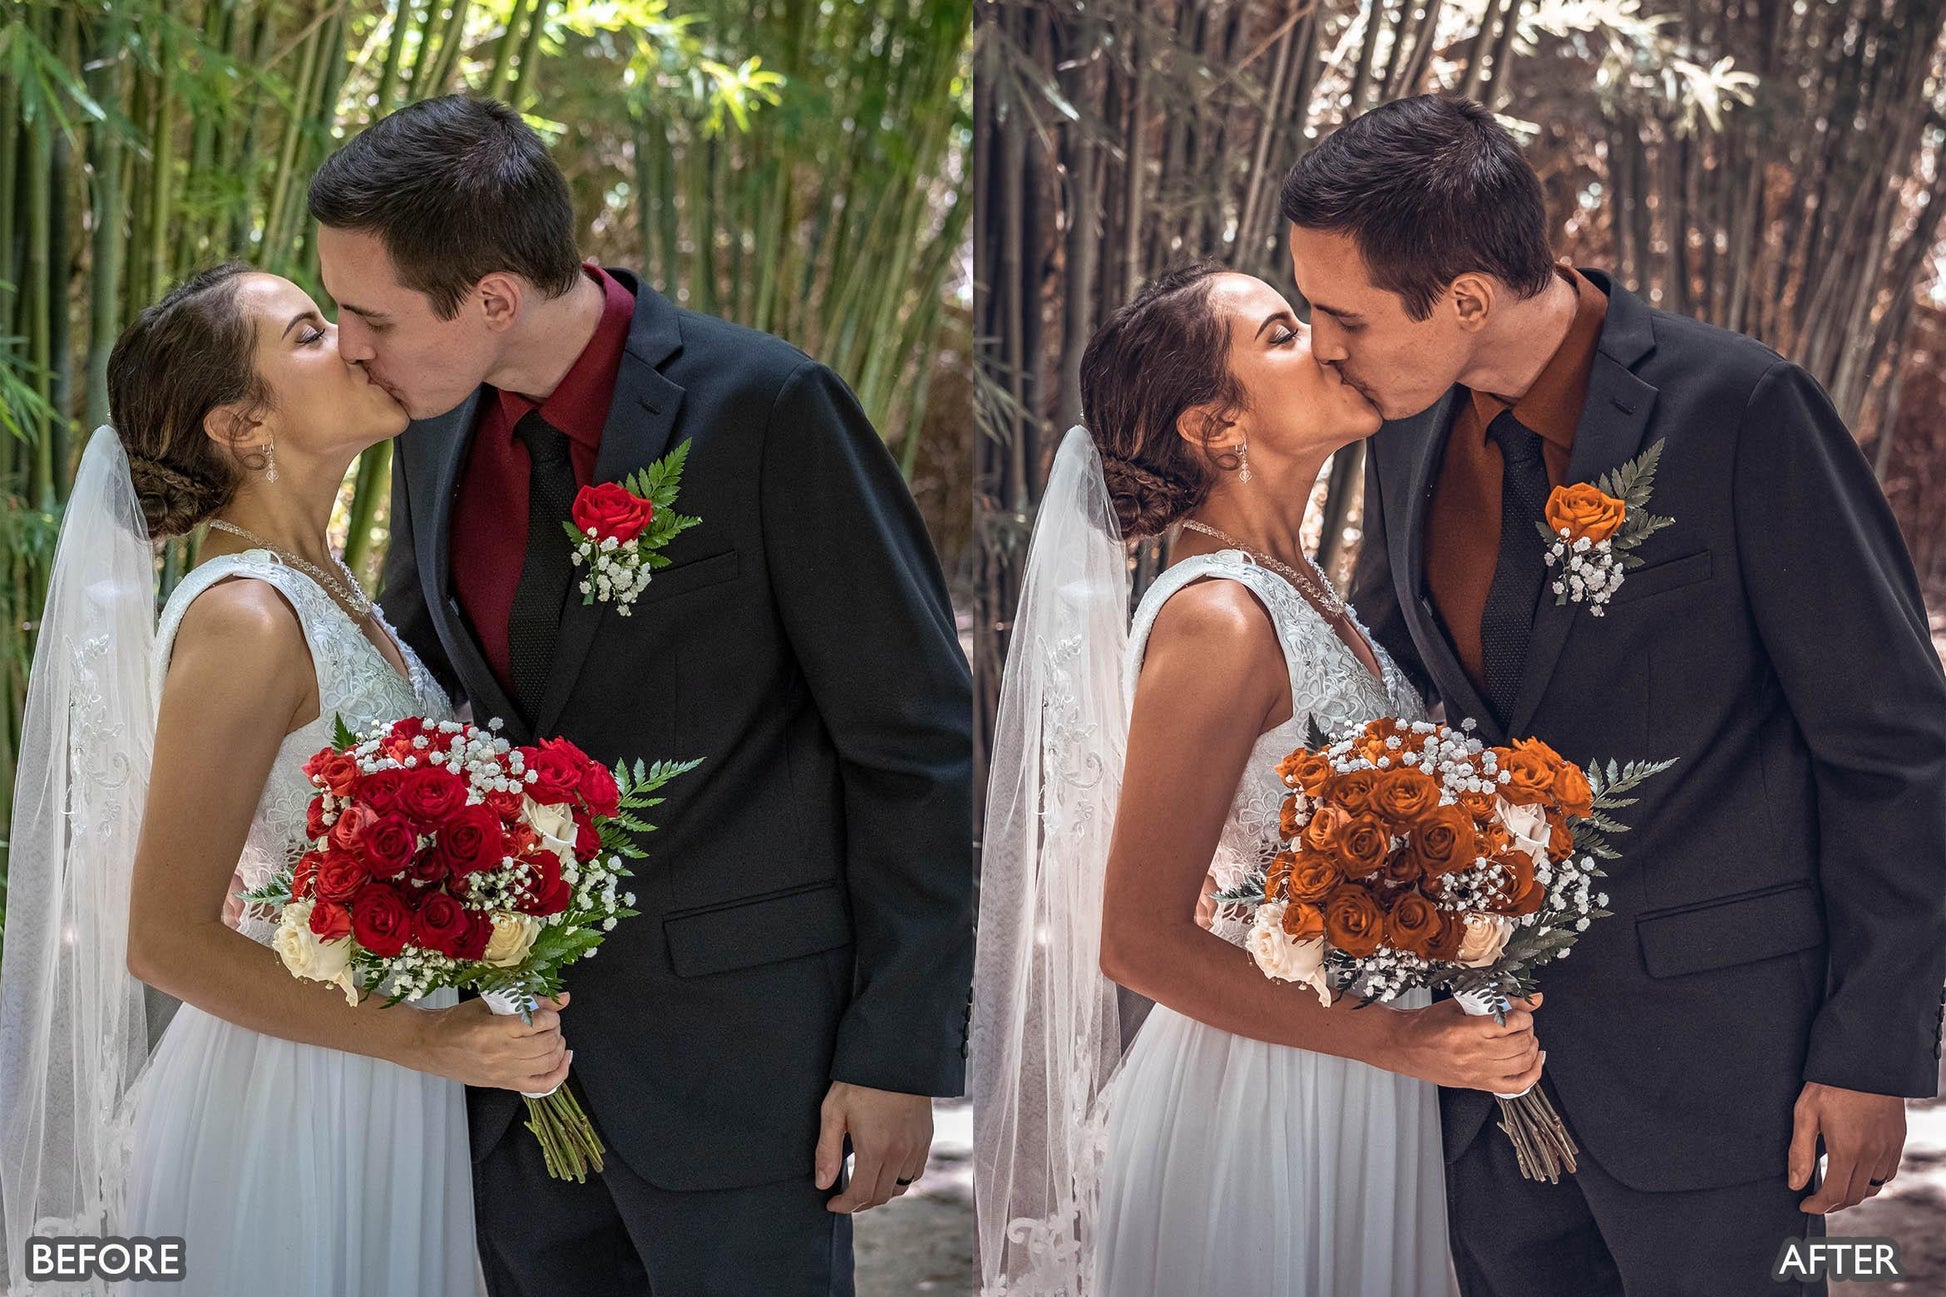 50 Gorgeous Lightroom Presets for Wedding Photography - adobe lightroom presets, Blogger presets, Cinematic Presets, instagram presets, lightroom presets, Minimalist presets, moody presets, Portrait presets, presets before and after, professional lightroom presets, Wedding Lightroom Presets Bundle - aaapresets.com